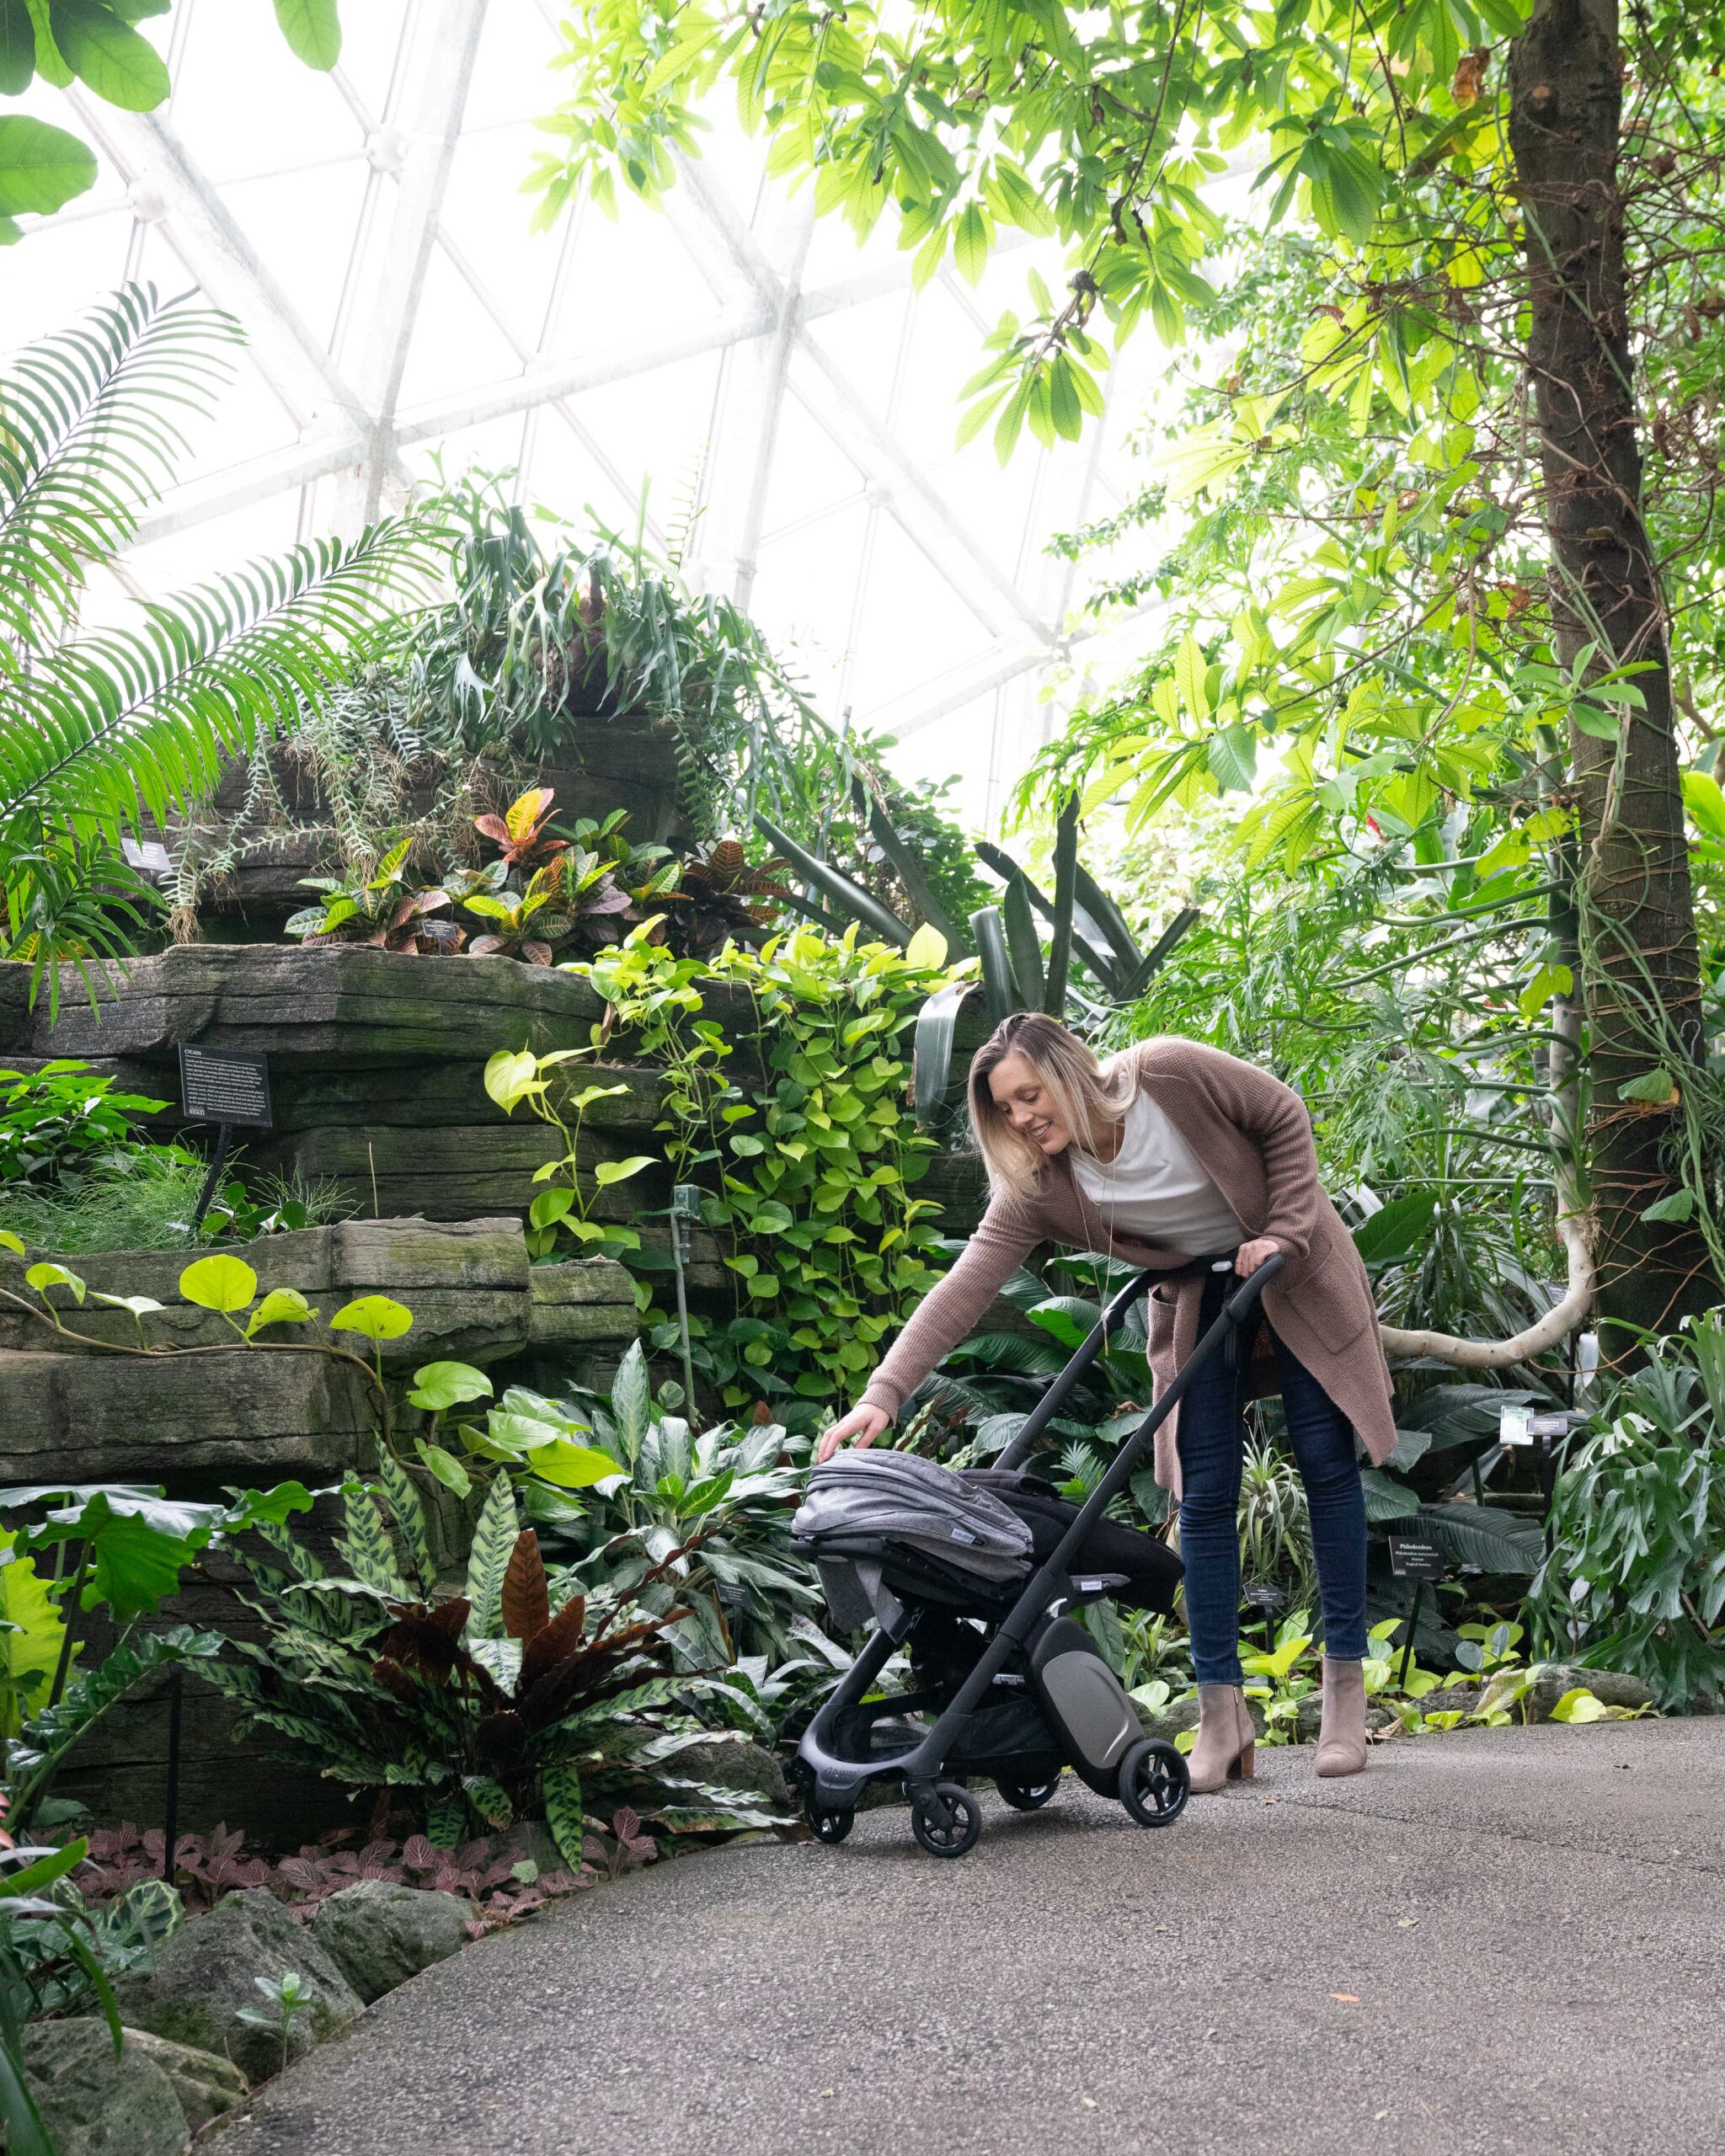 Bugaboo Ant Review – Is It the best Travel Stroller?